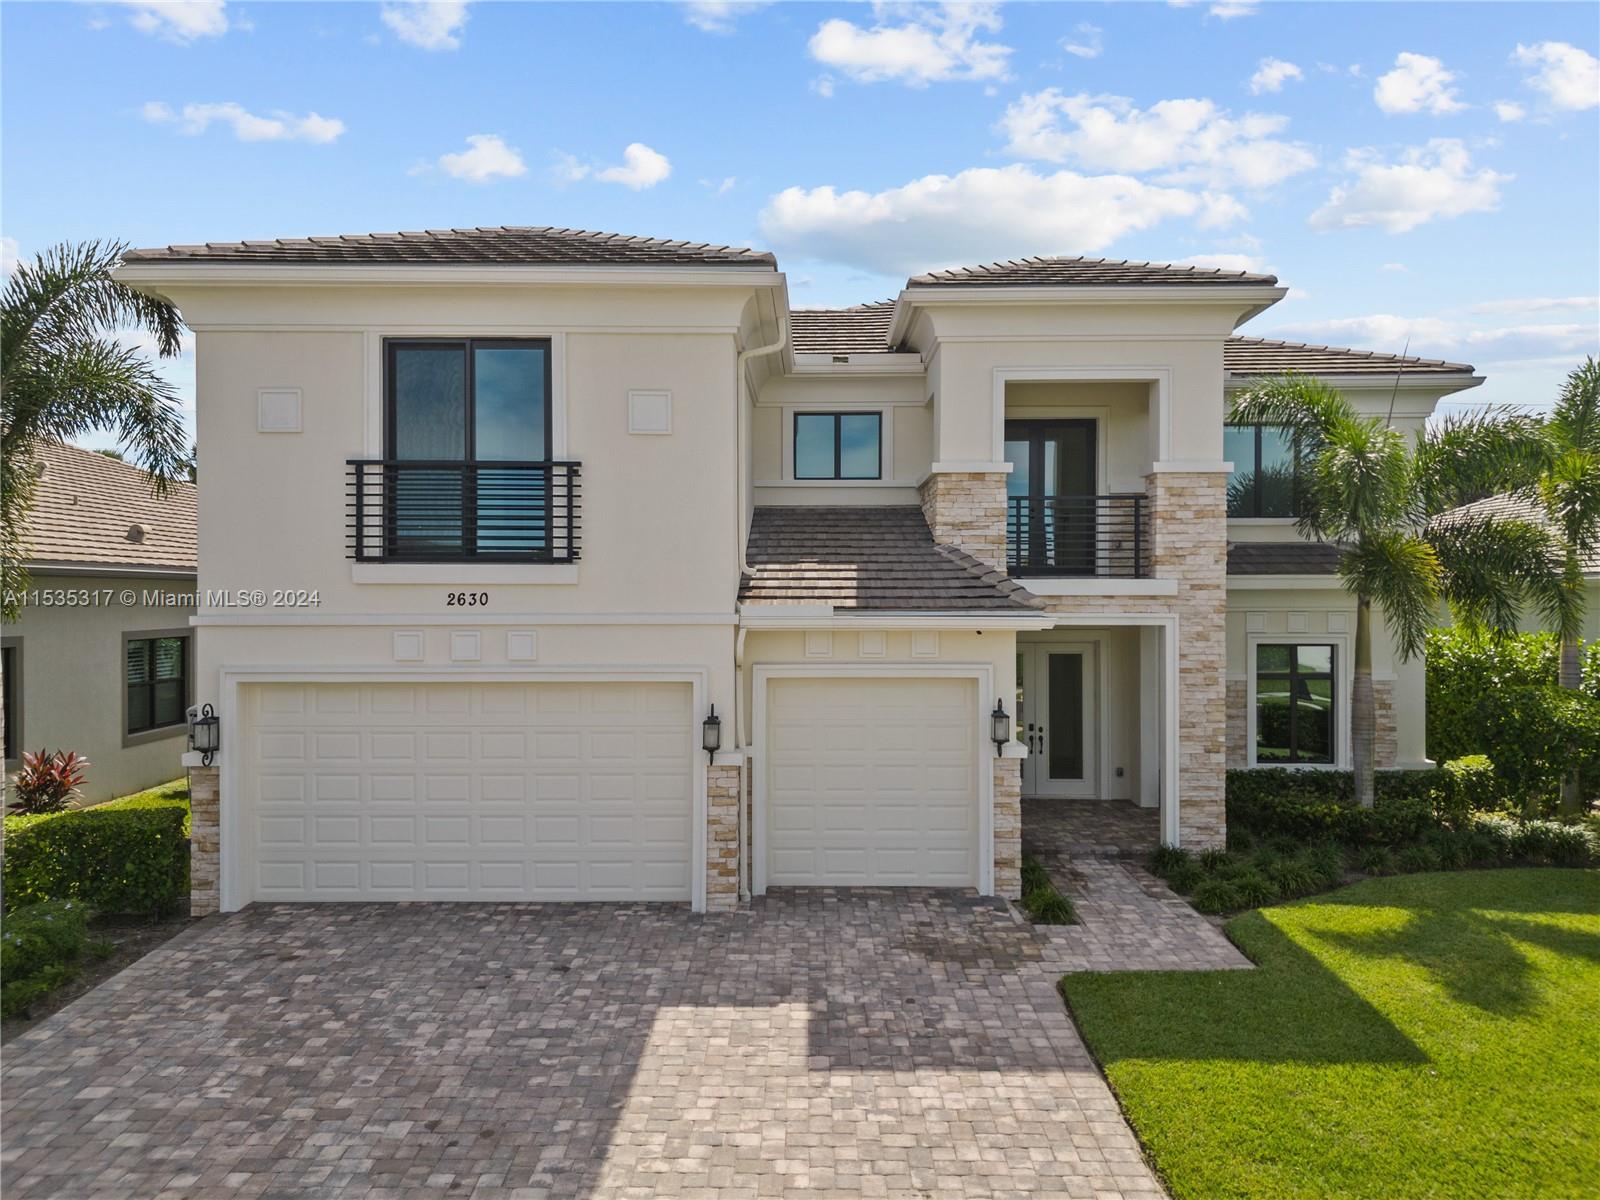 Photo of 2630 NW 69th St in Boca Raton, FL